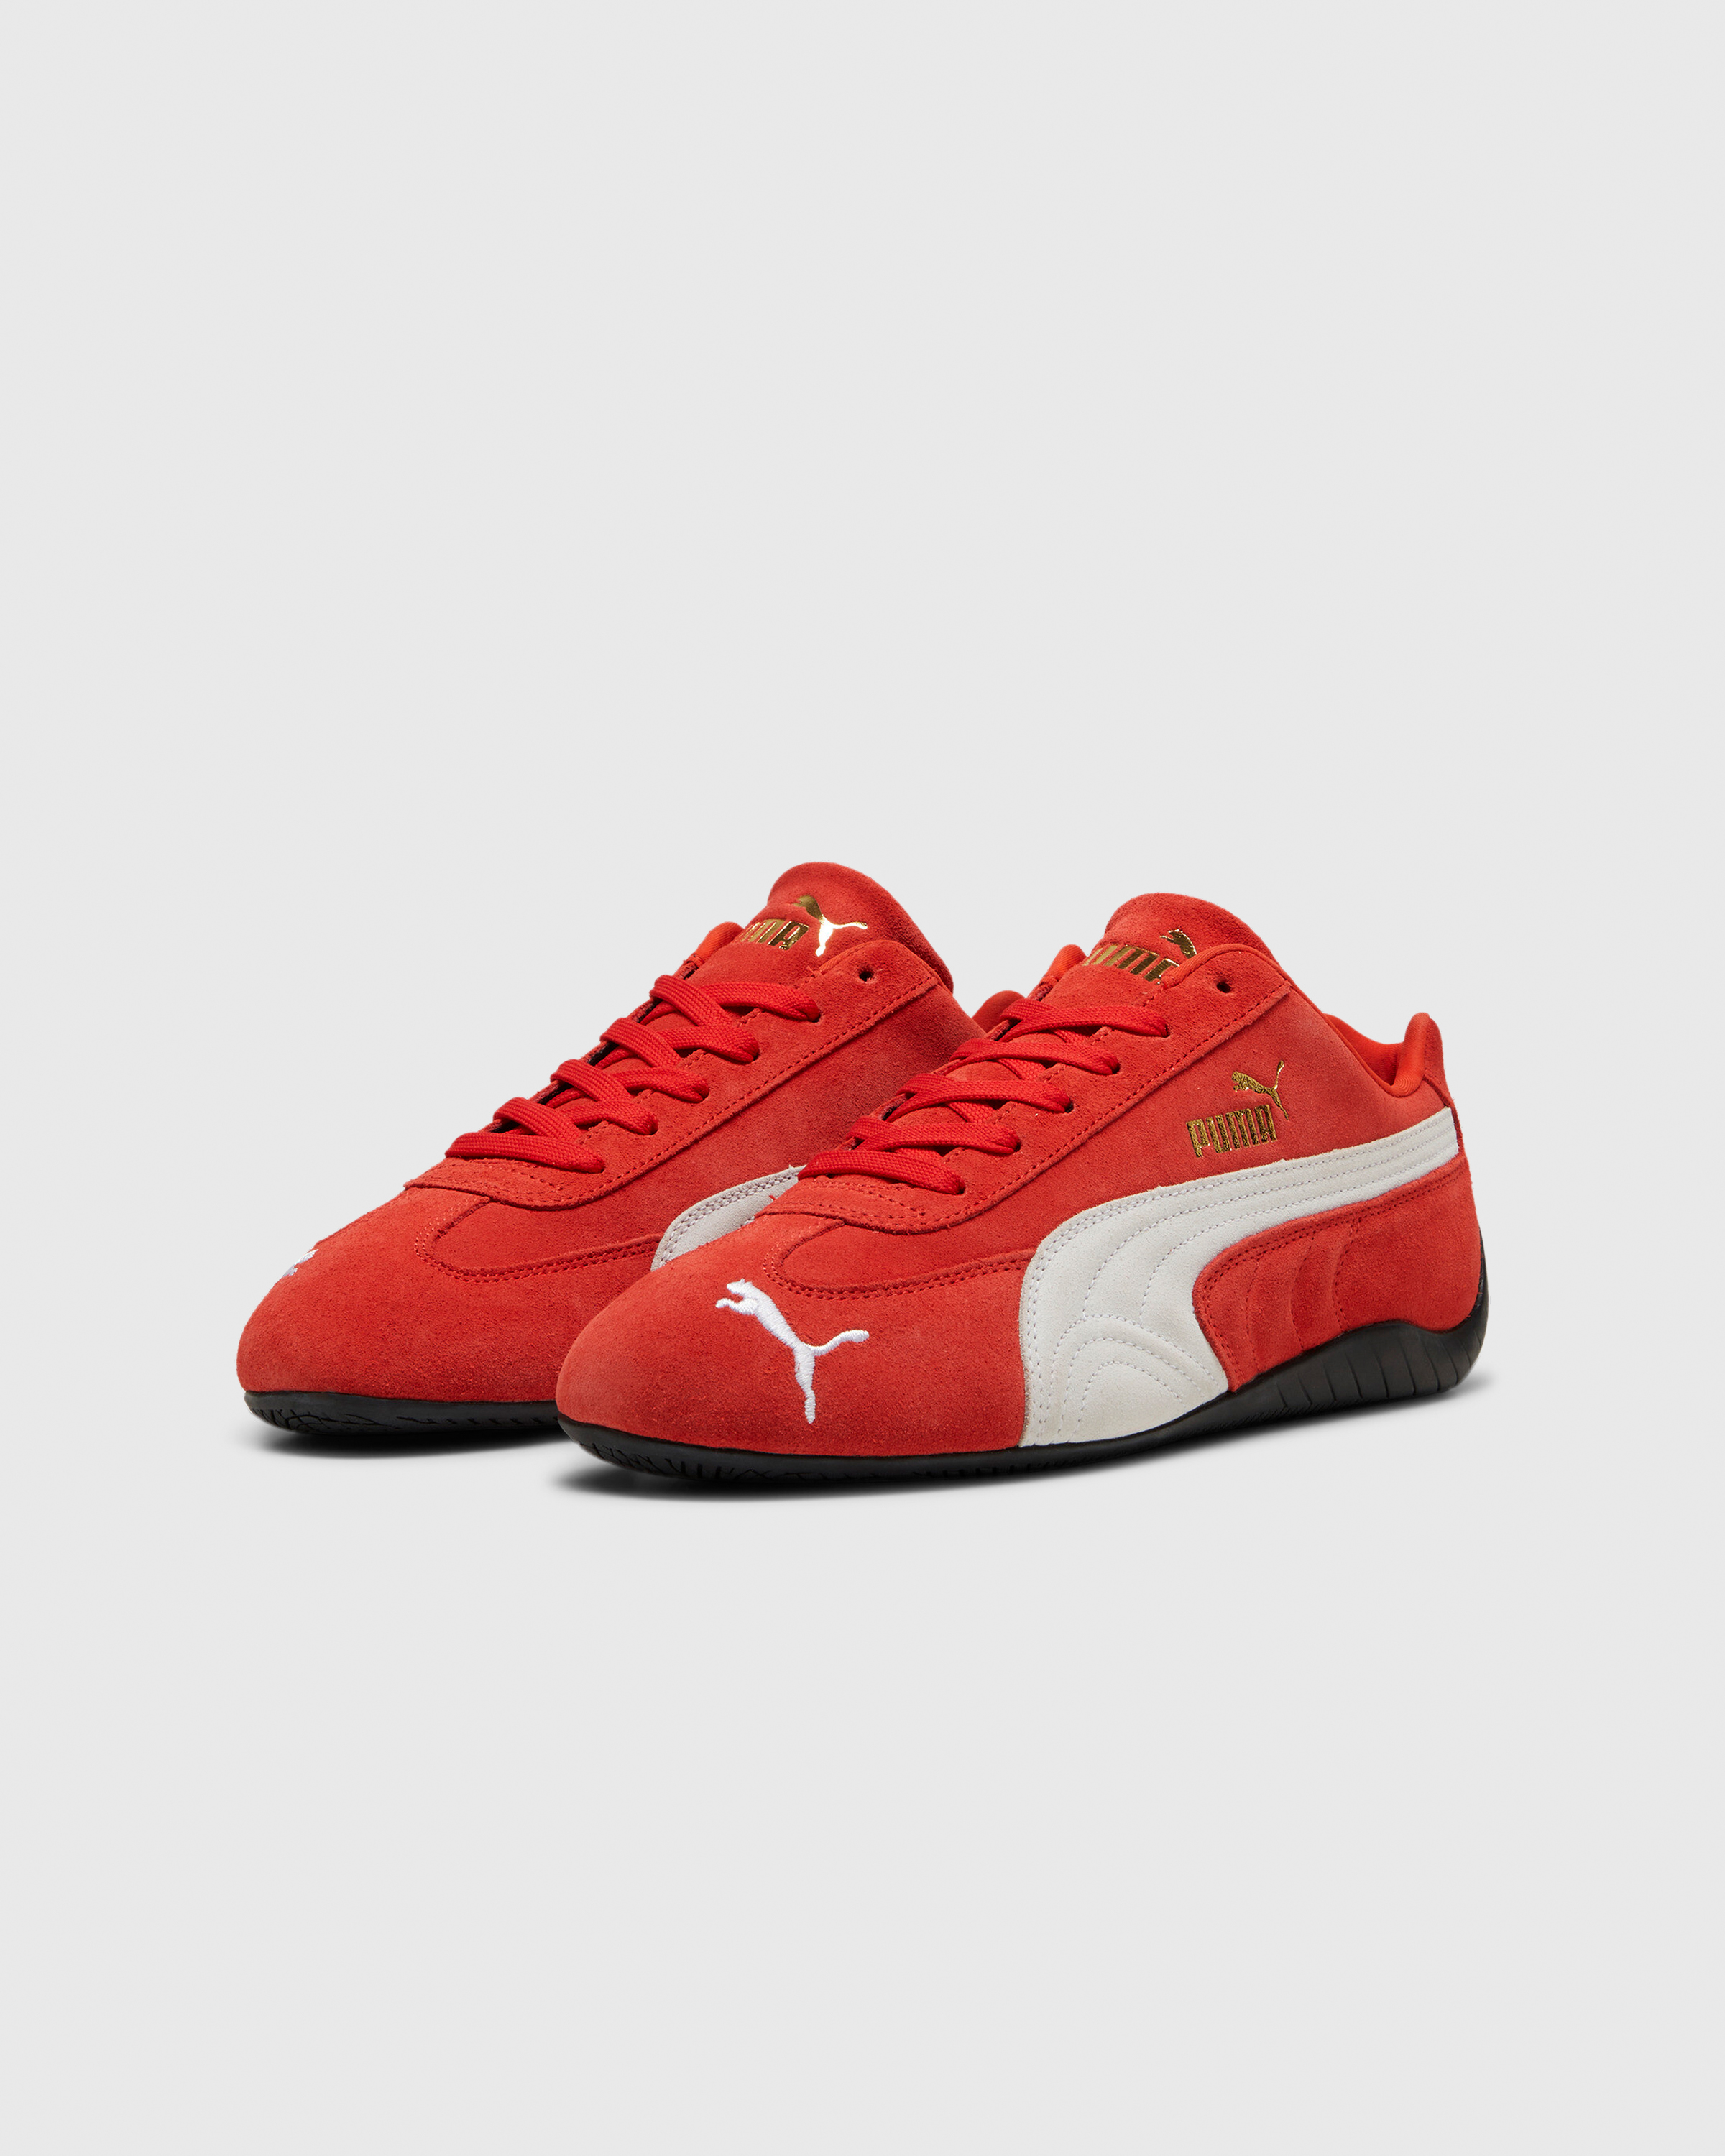 Puma – Speedcat OG Red/White - Low Top Sneakers - Red - Image 5